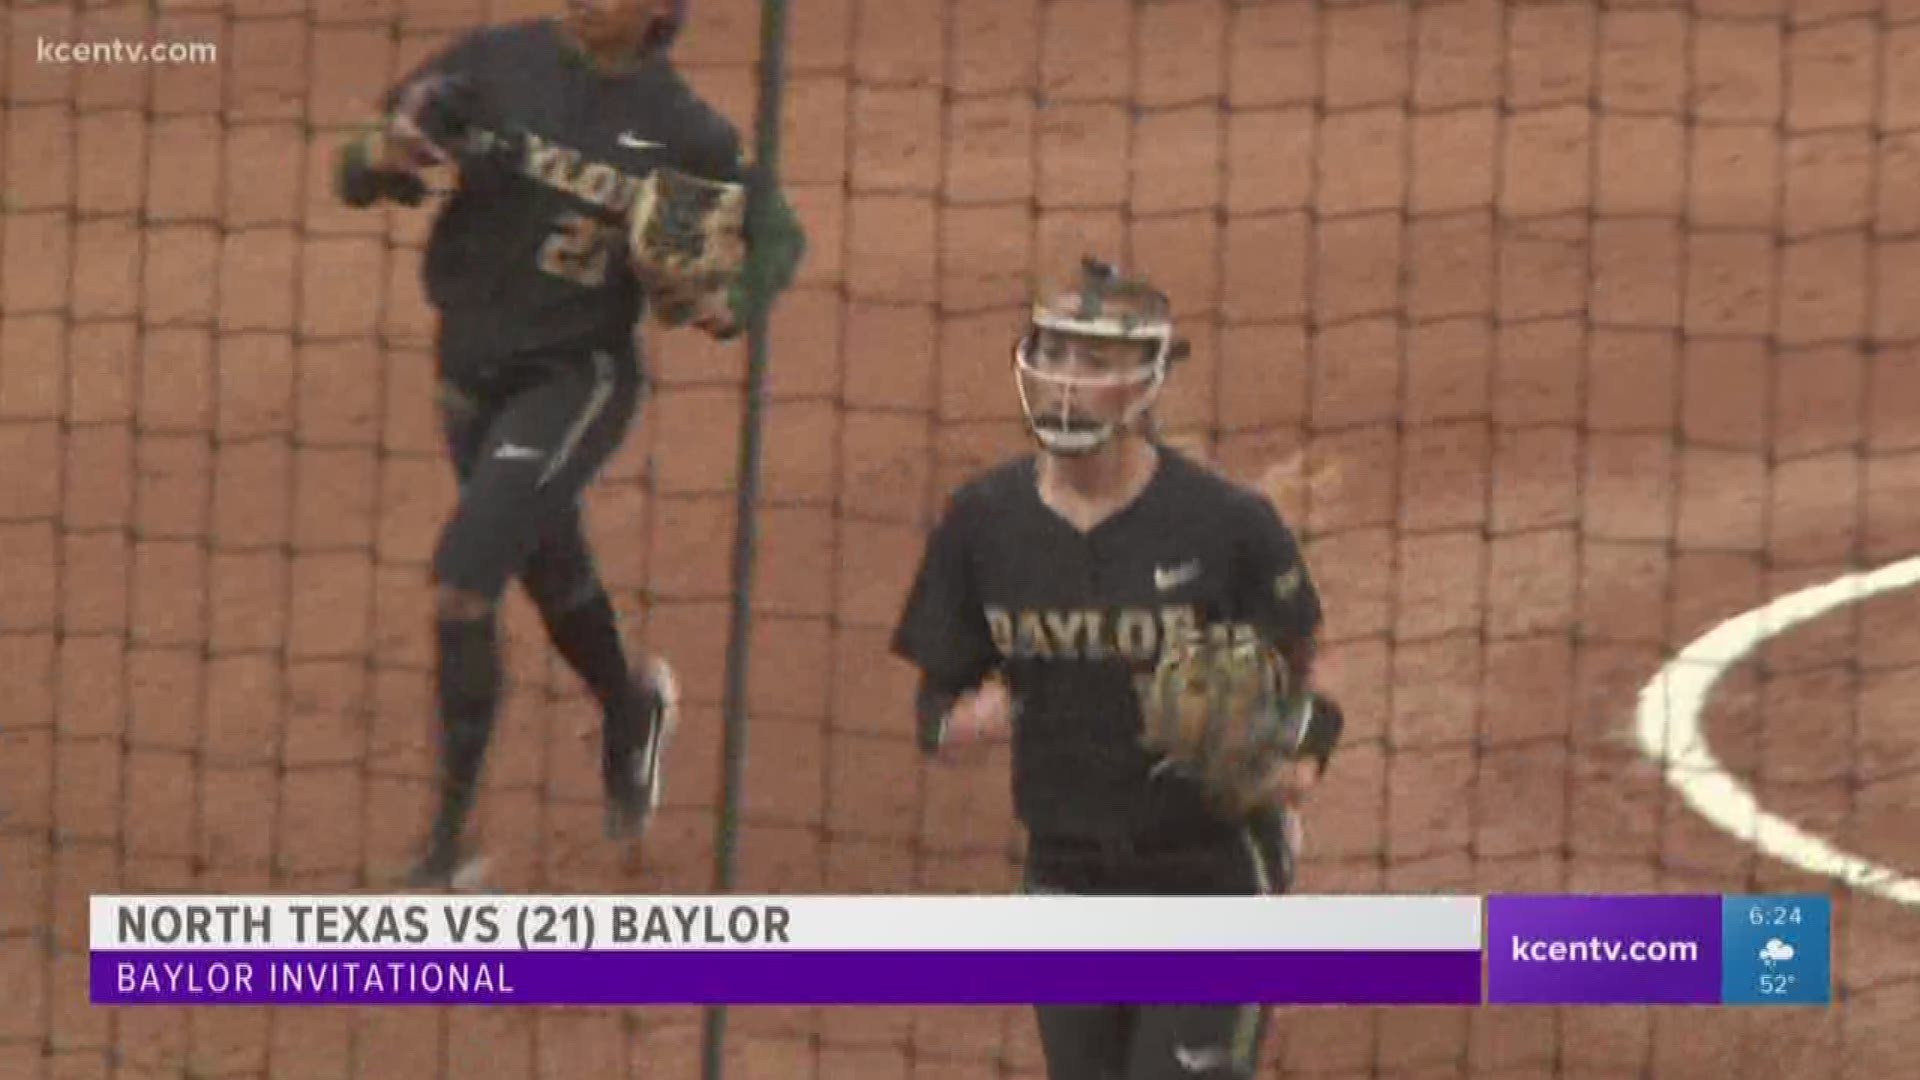 The Lady Bears won 5-2, with Belton native Sidney Holman tossing six strikeouts.